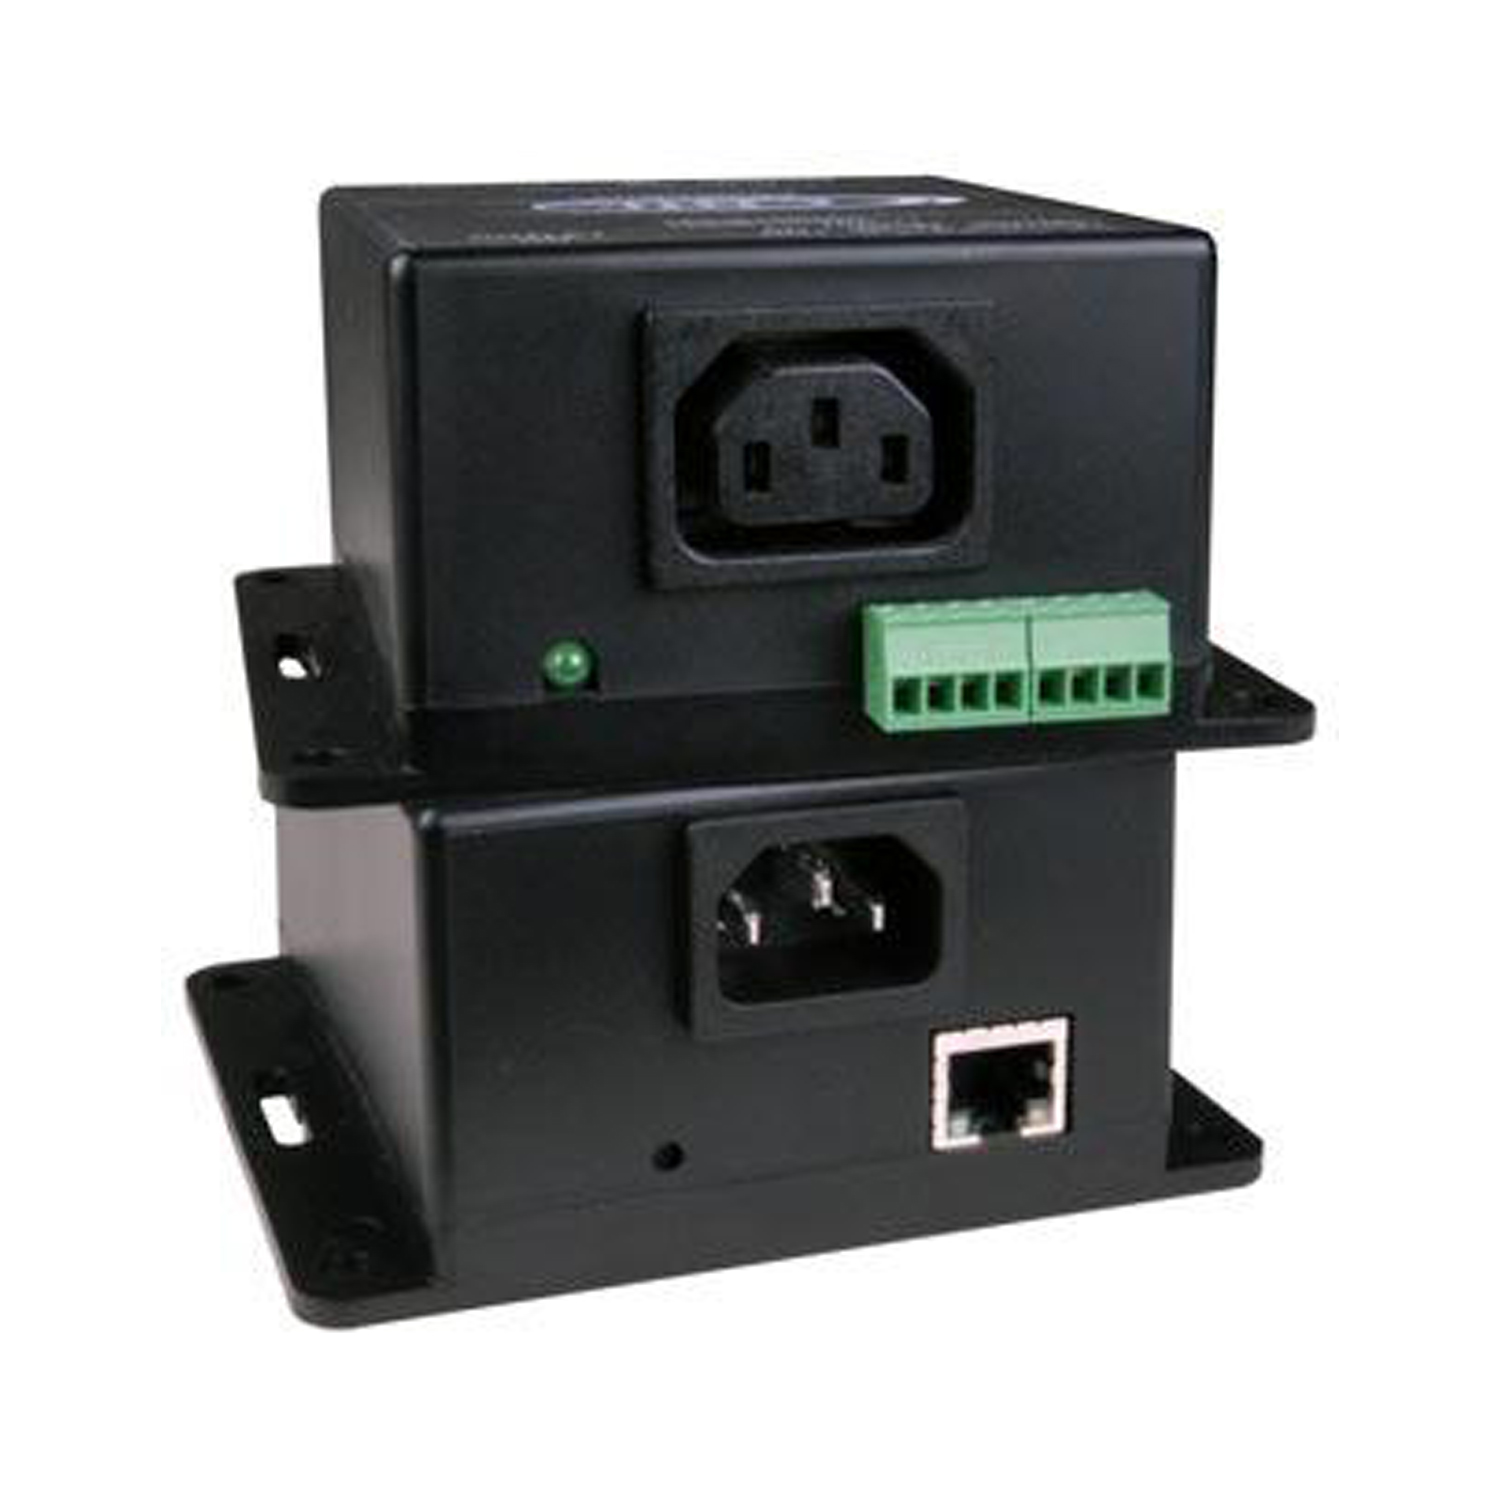 PWR-RMT-RBT-LC - Low-Cost Remote Power Reboot Switch with IEC320 C13 Outlet